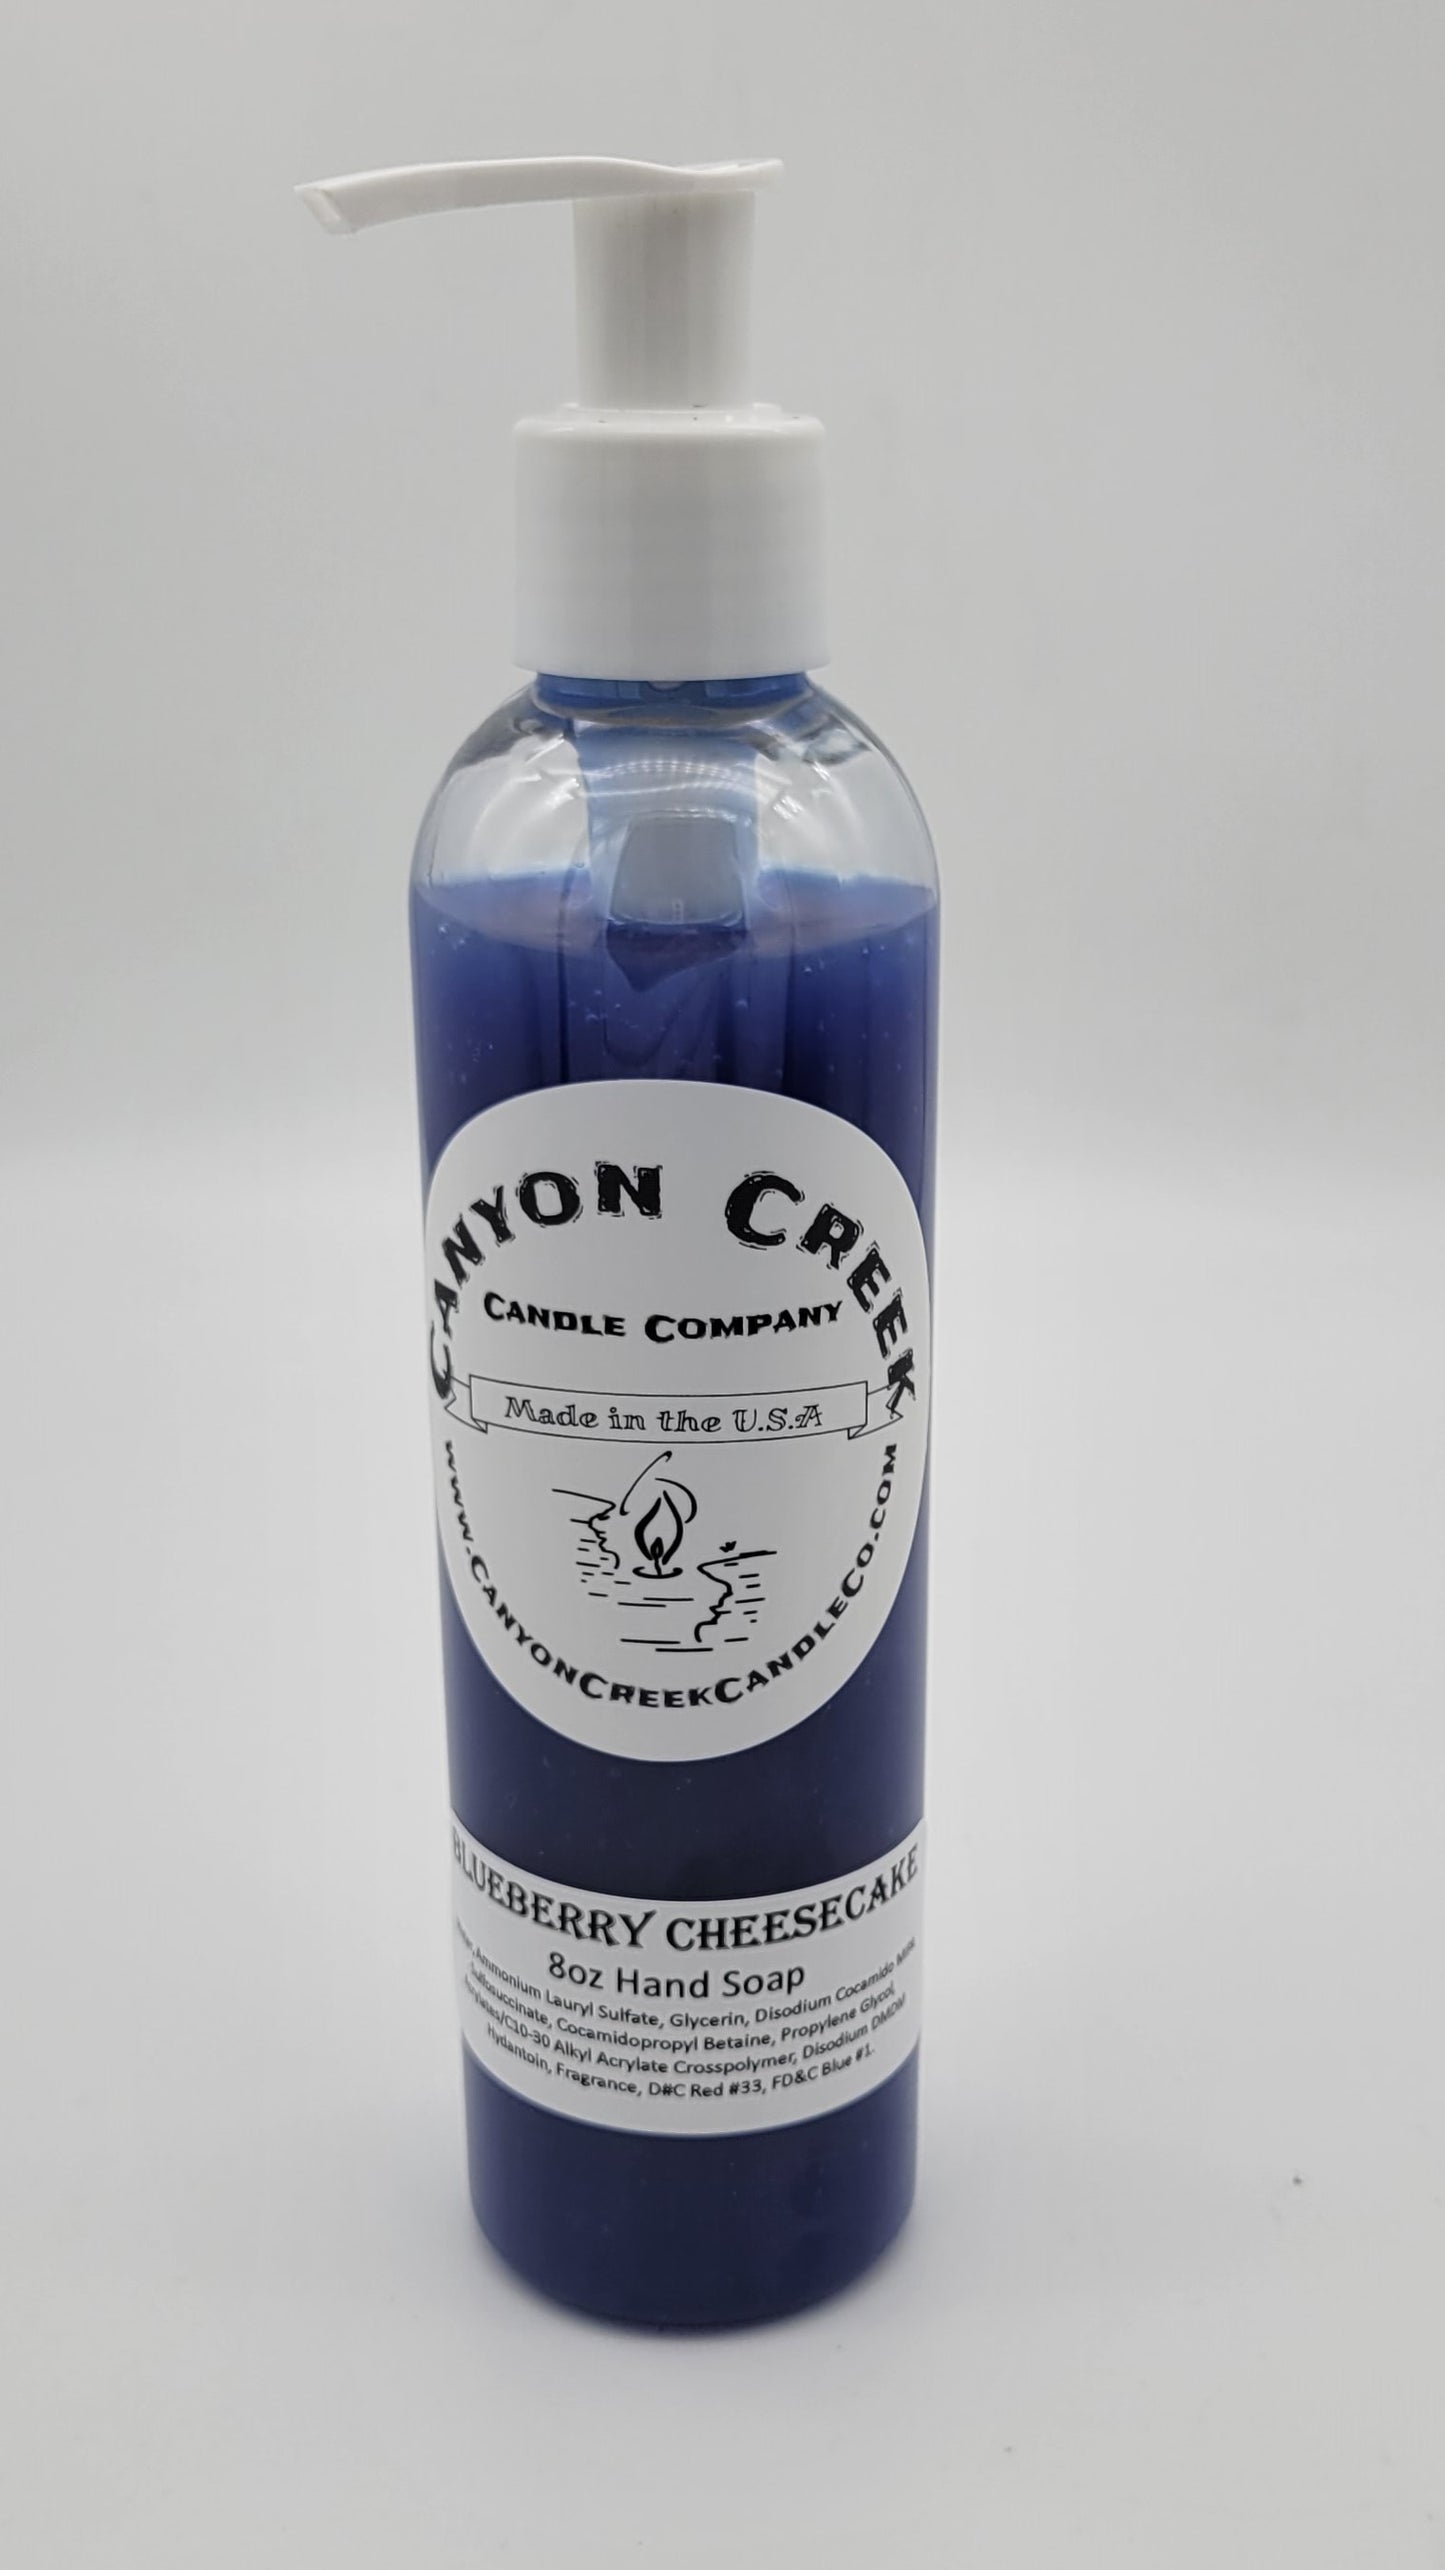 Blueberry Cheesecake 8oz Hand Soap